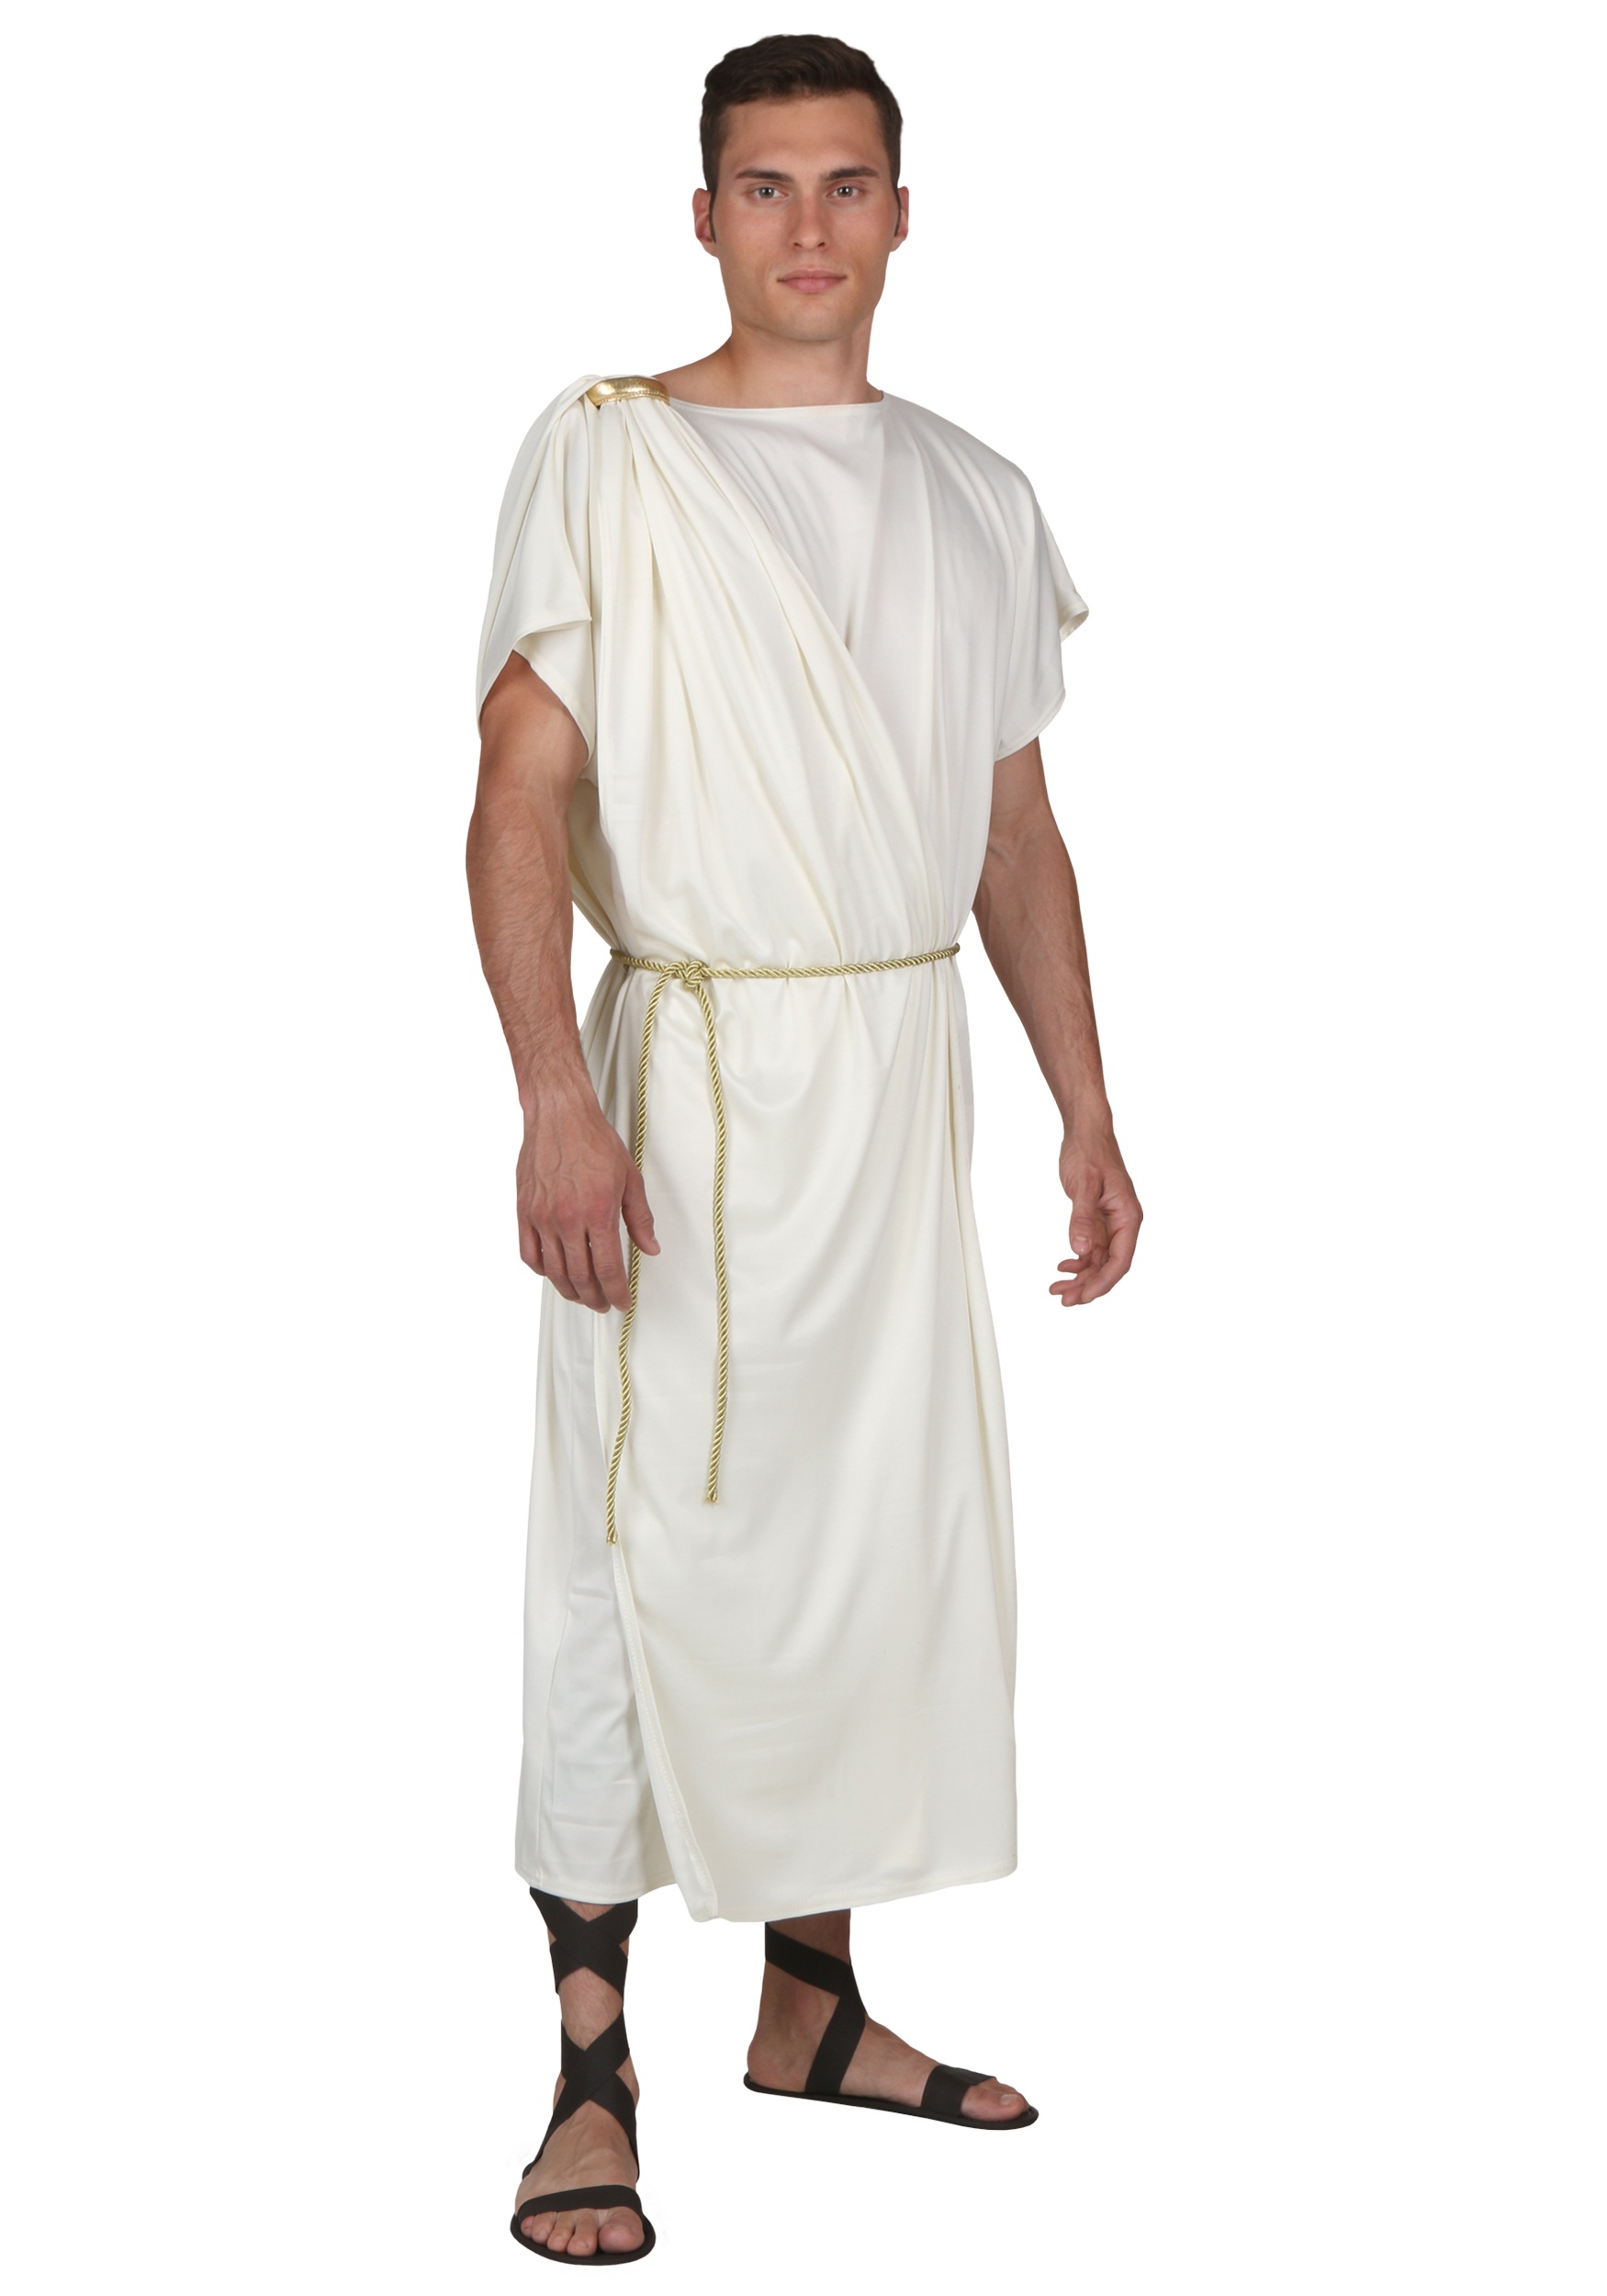 Toga Halloween Costume for Men | Exclusive | Made By Us Costume